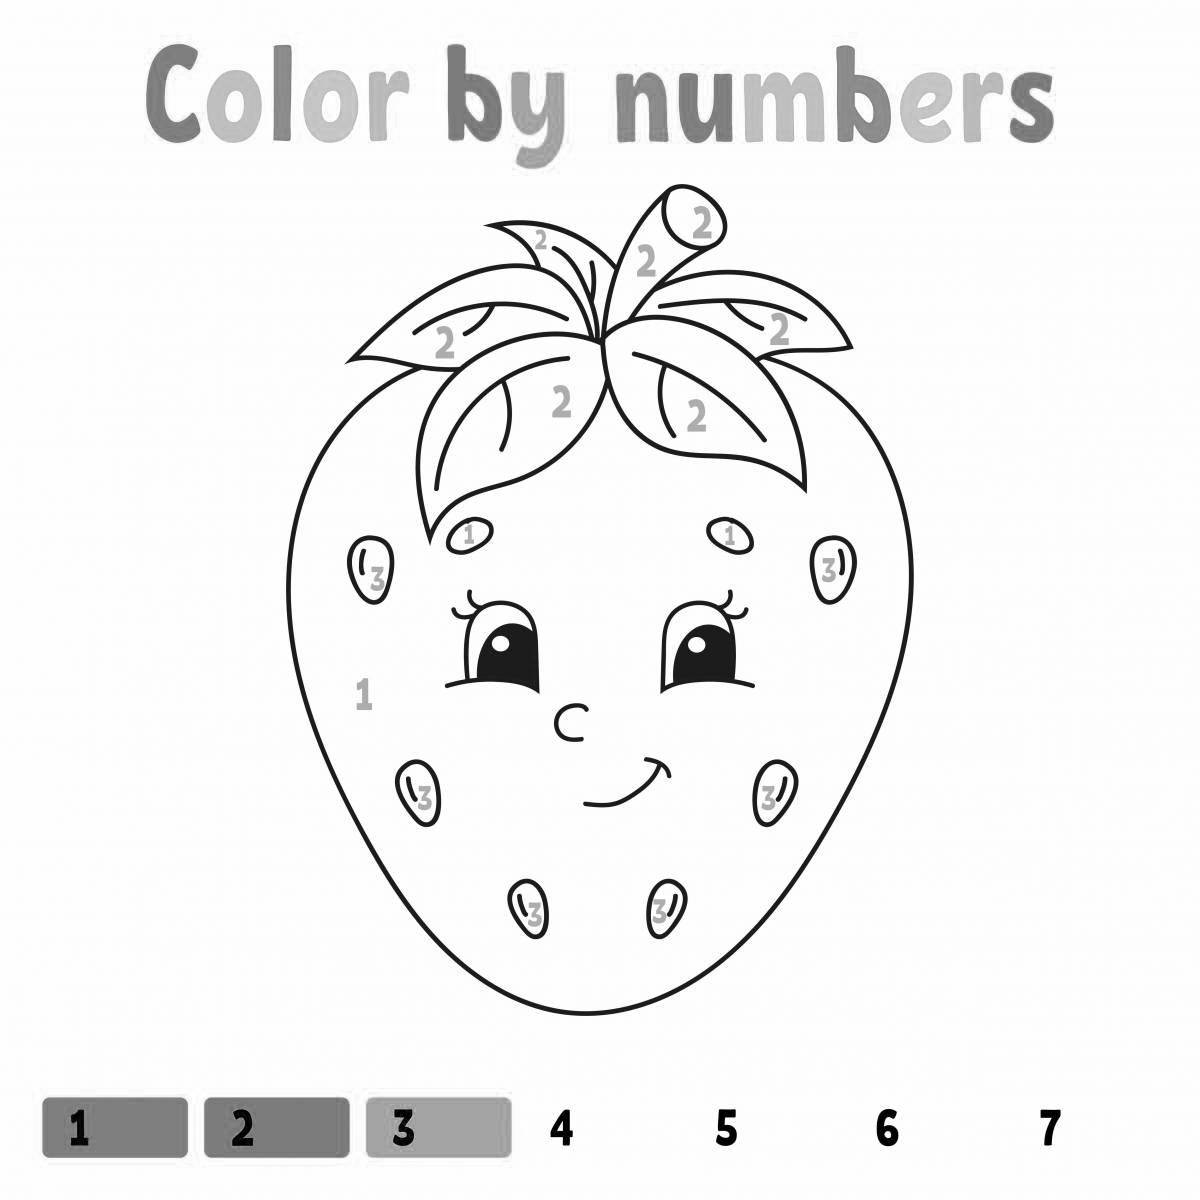 Fun coloring strawberries with numbers